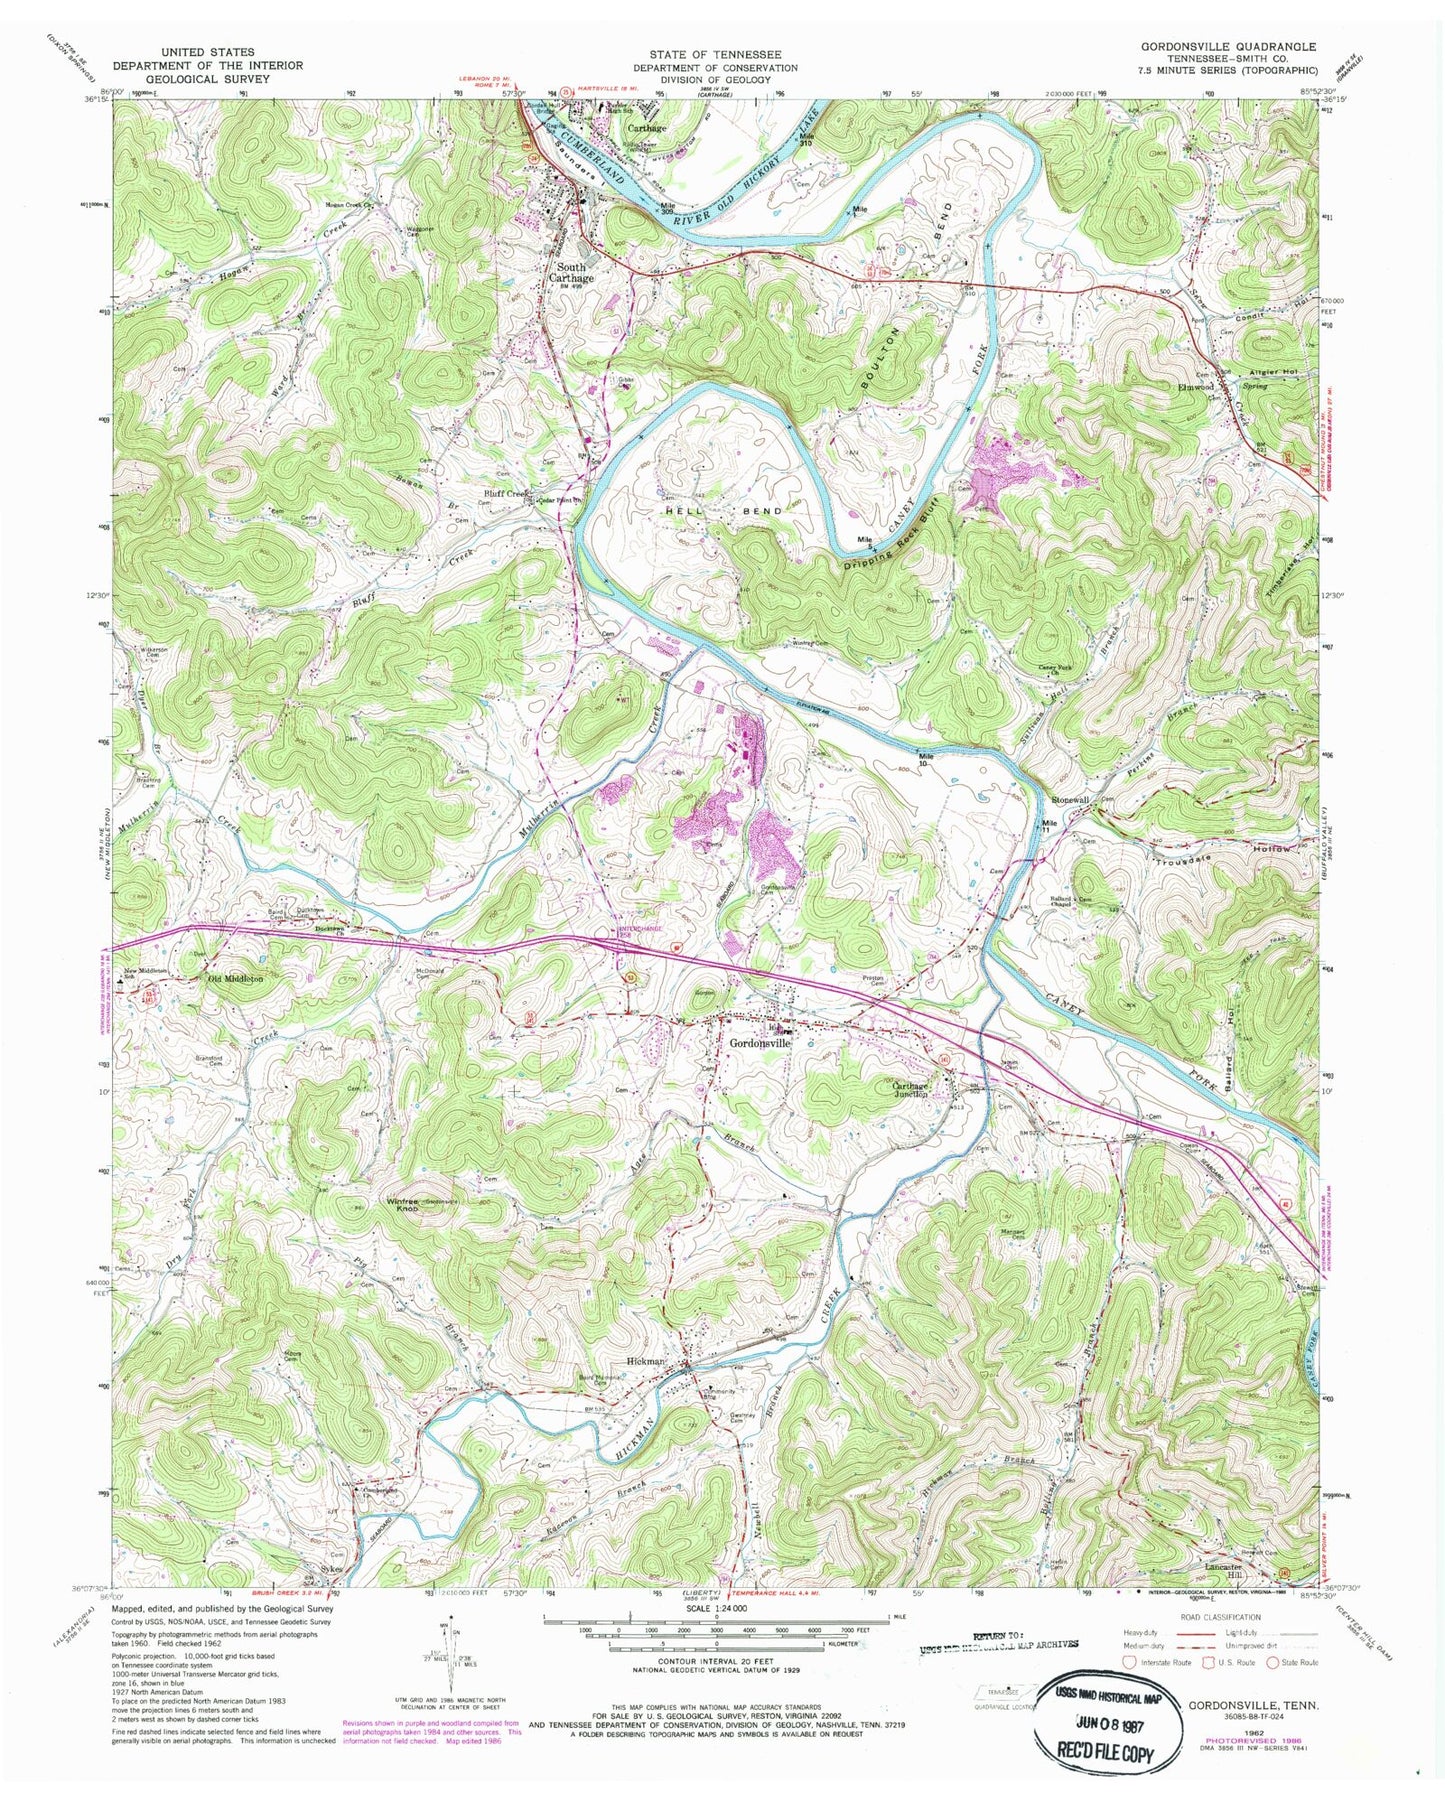 Classic USGS Gordonsville Tennessee 7.5'x7.5' Topo Map Image